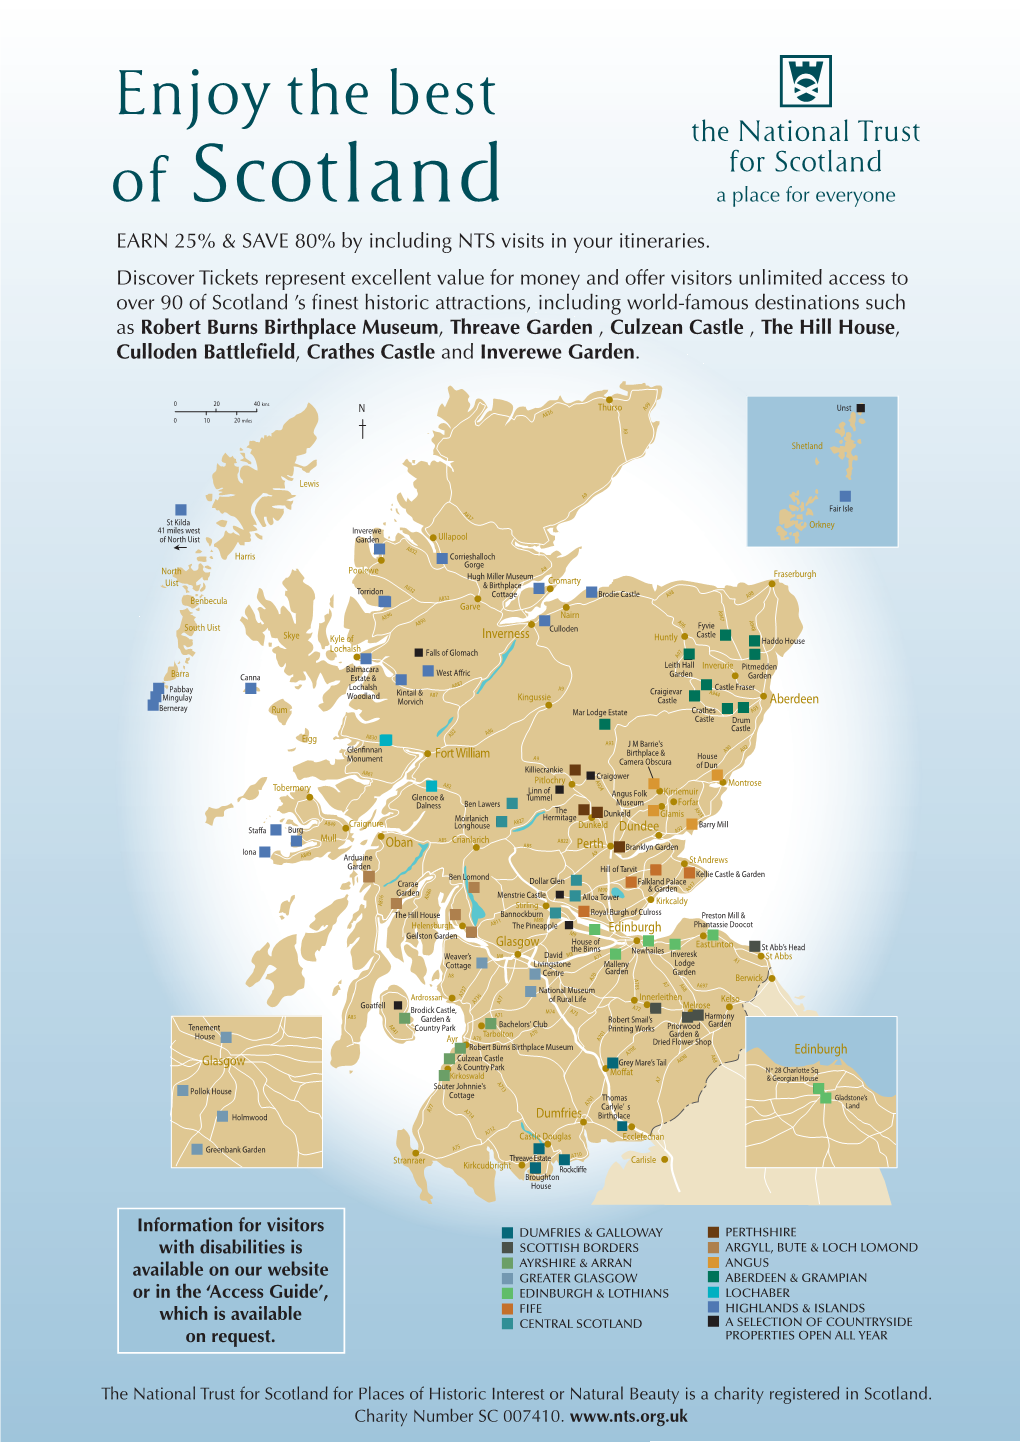 Of Scotland EARN 25% & SAVE 80% by Including NTS Visits in Your Itineraries